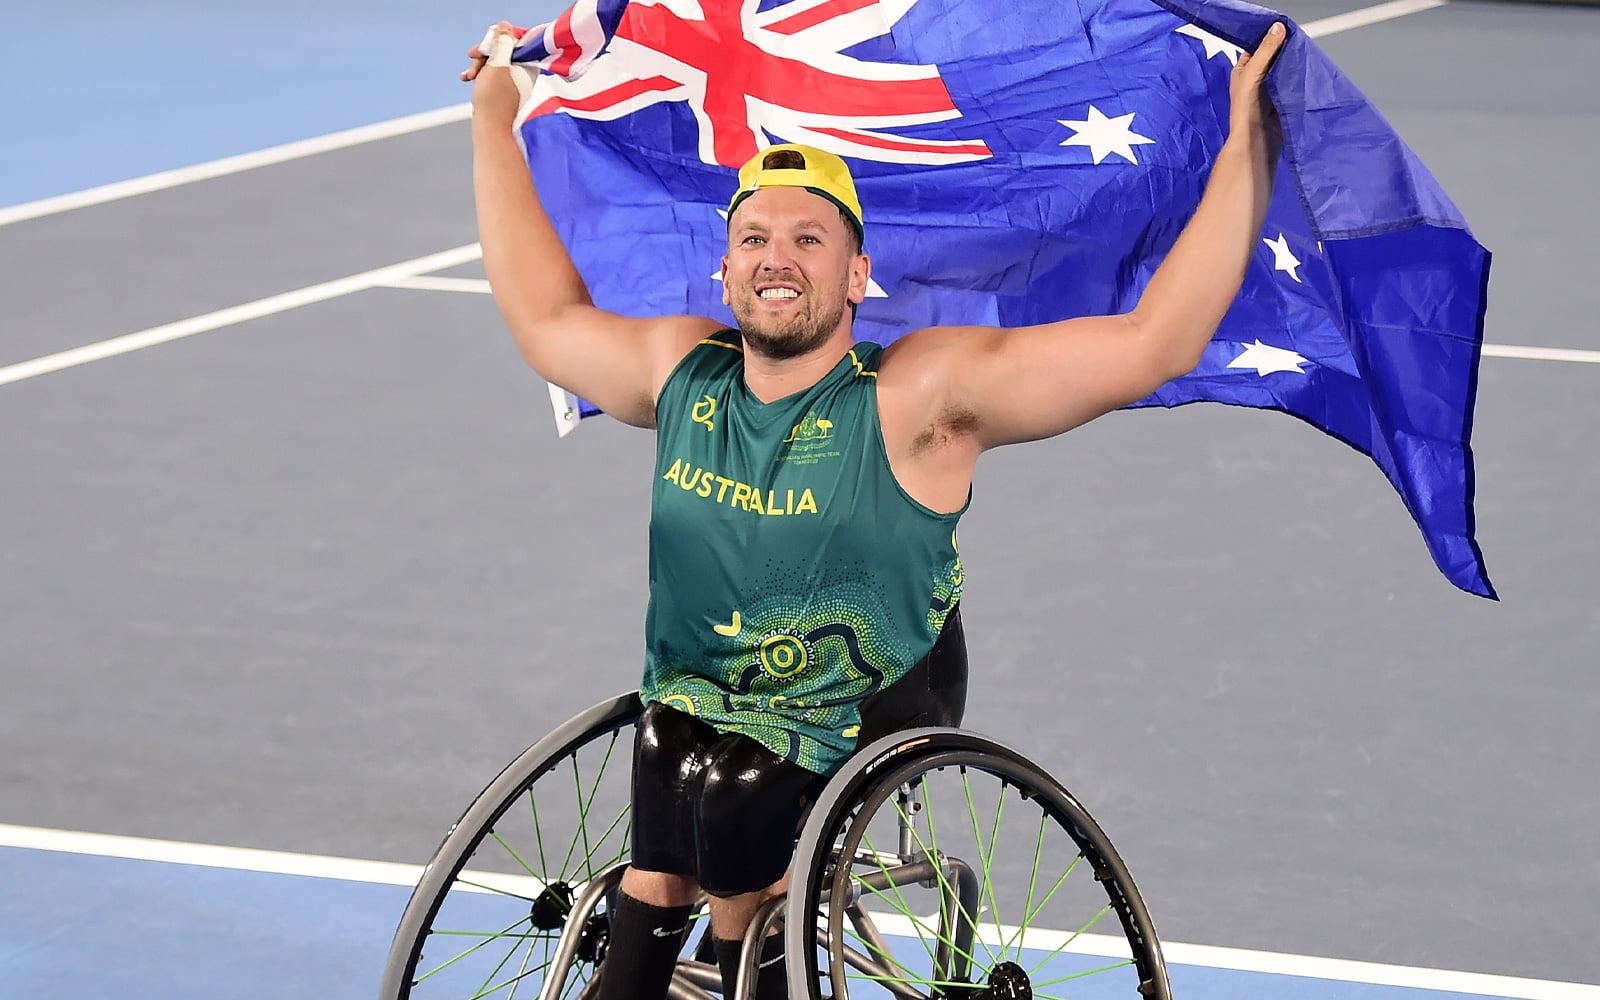 Australian Paralympian Invited To Her Majesty’s Funeral